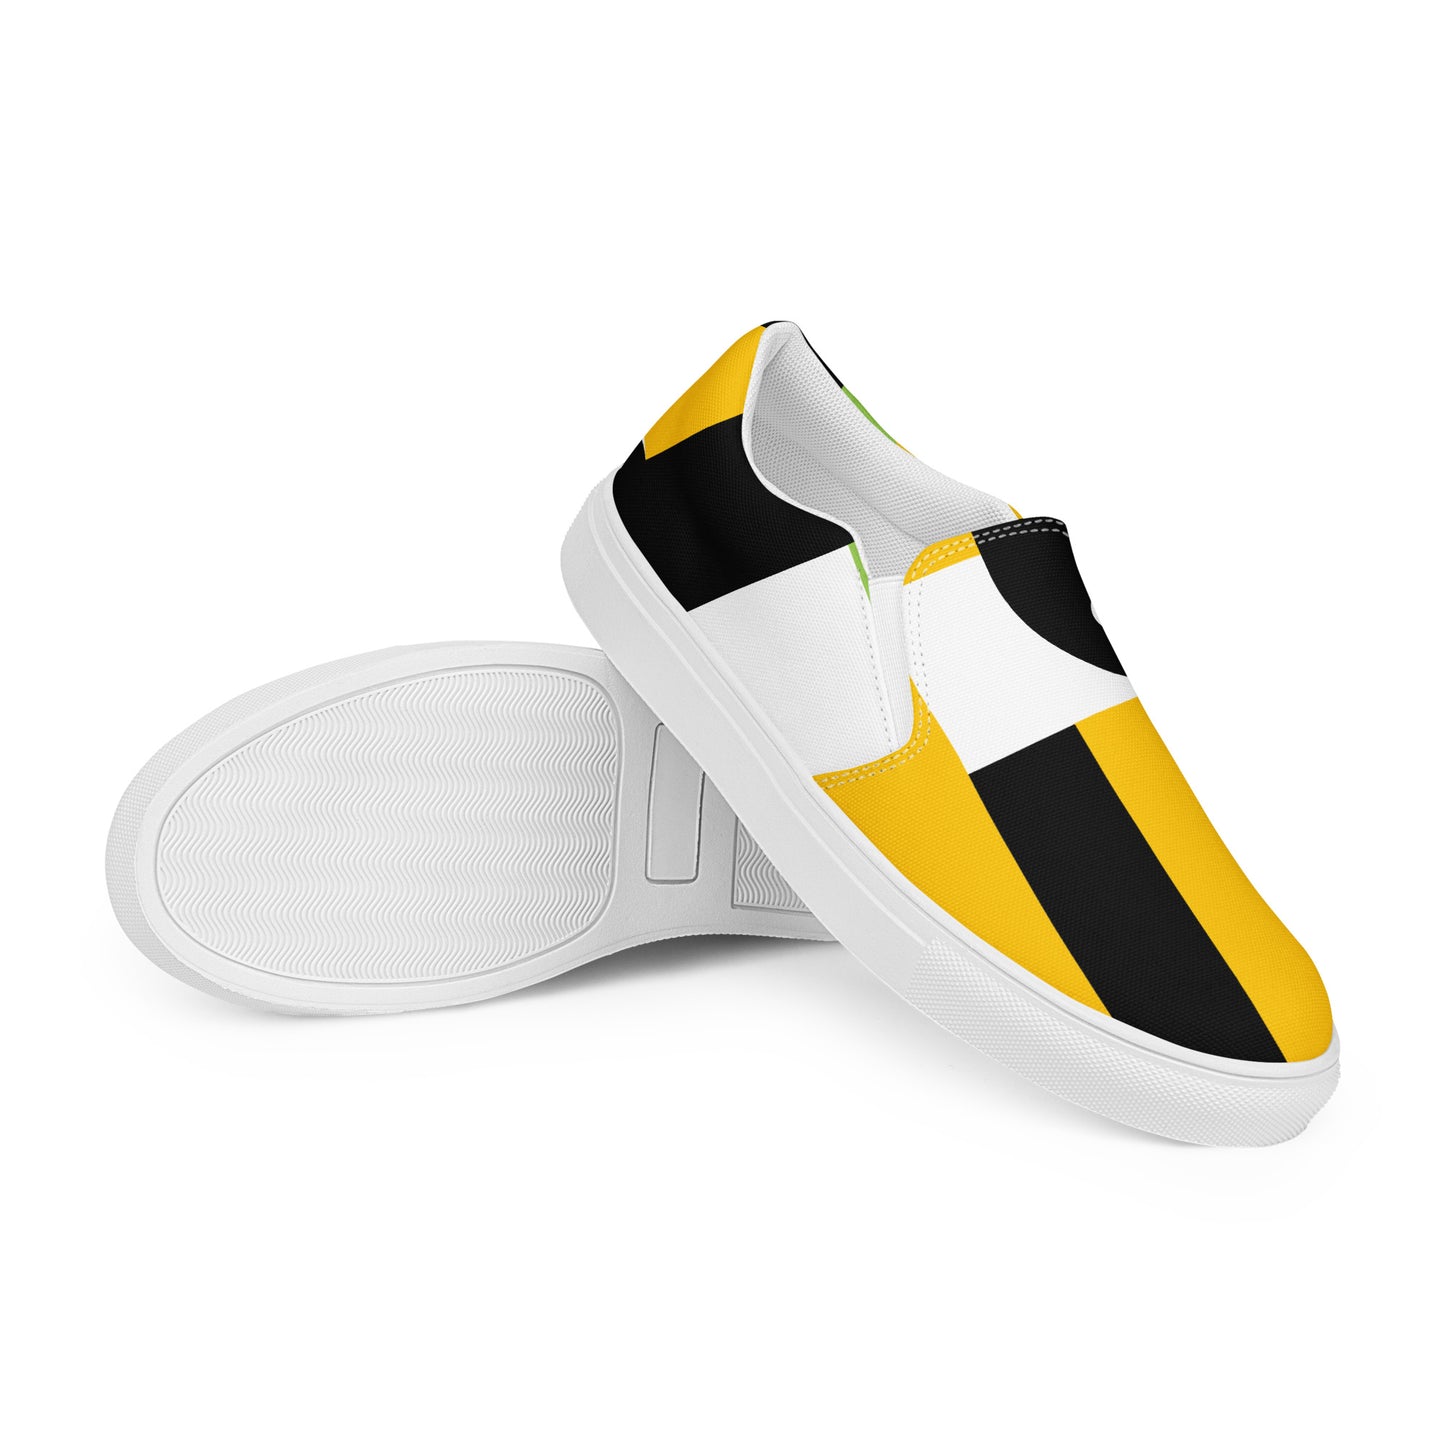 Yellow, Green And Black Geometric - Men’s slip-on canvas shoes Mens Slip On Shoes